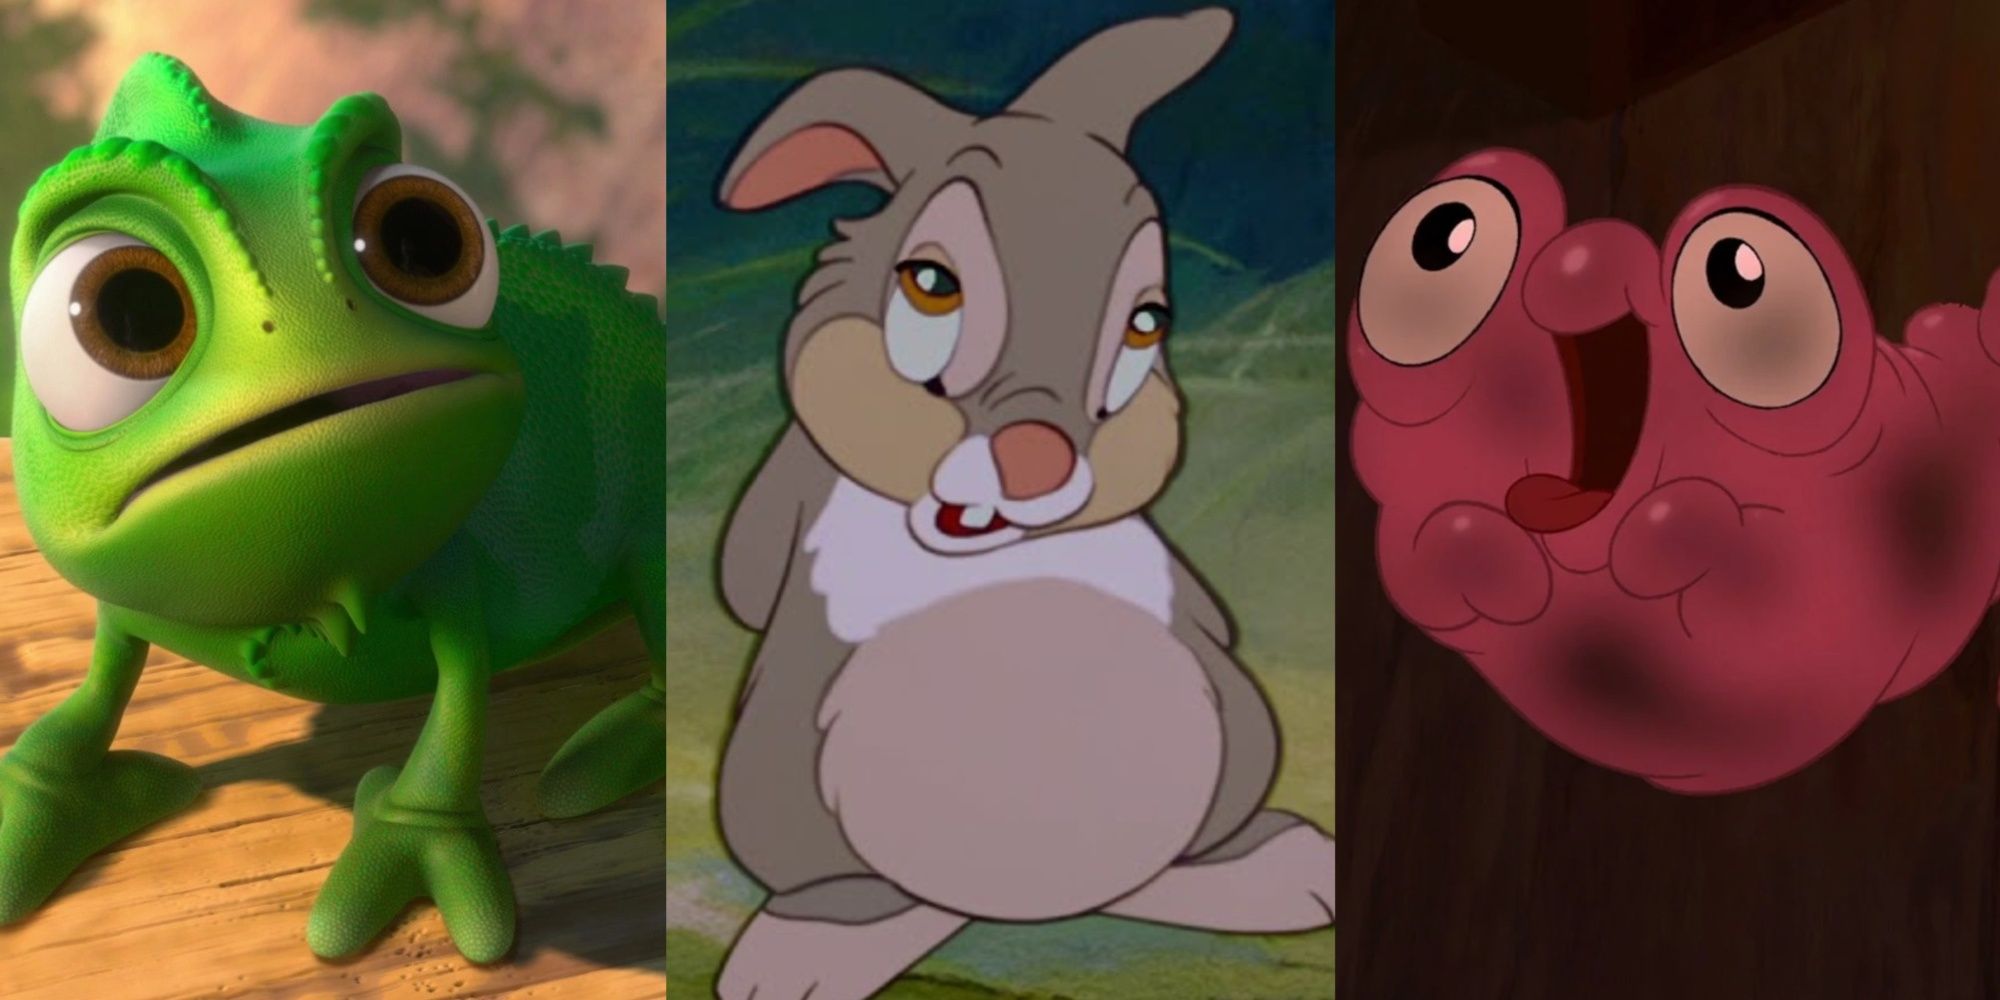 Split images of Pascal from Tangled, Thumper from Bambi, and Morph from Treasure Planet